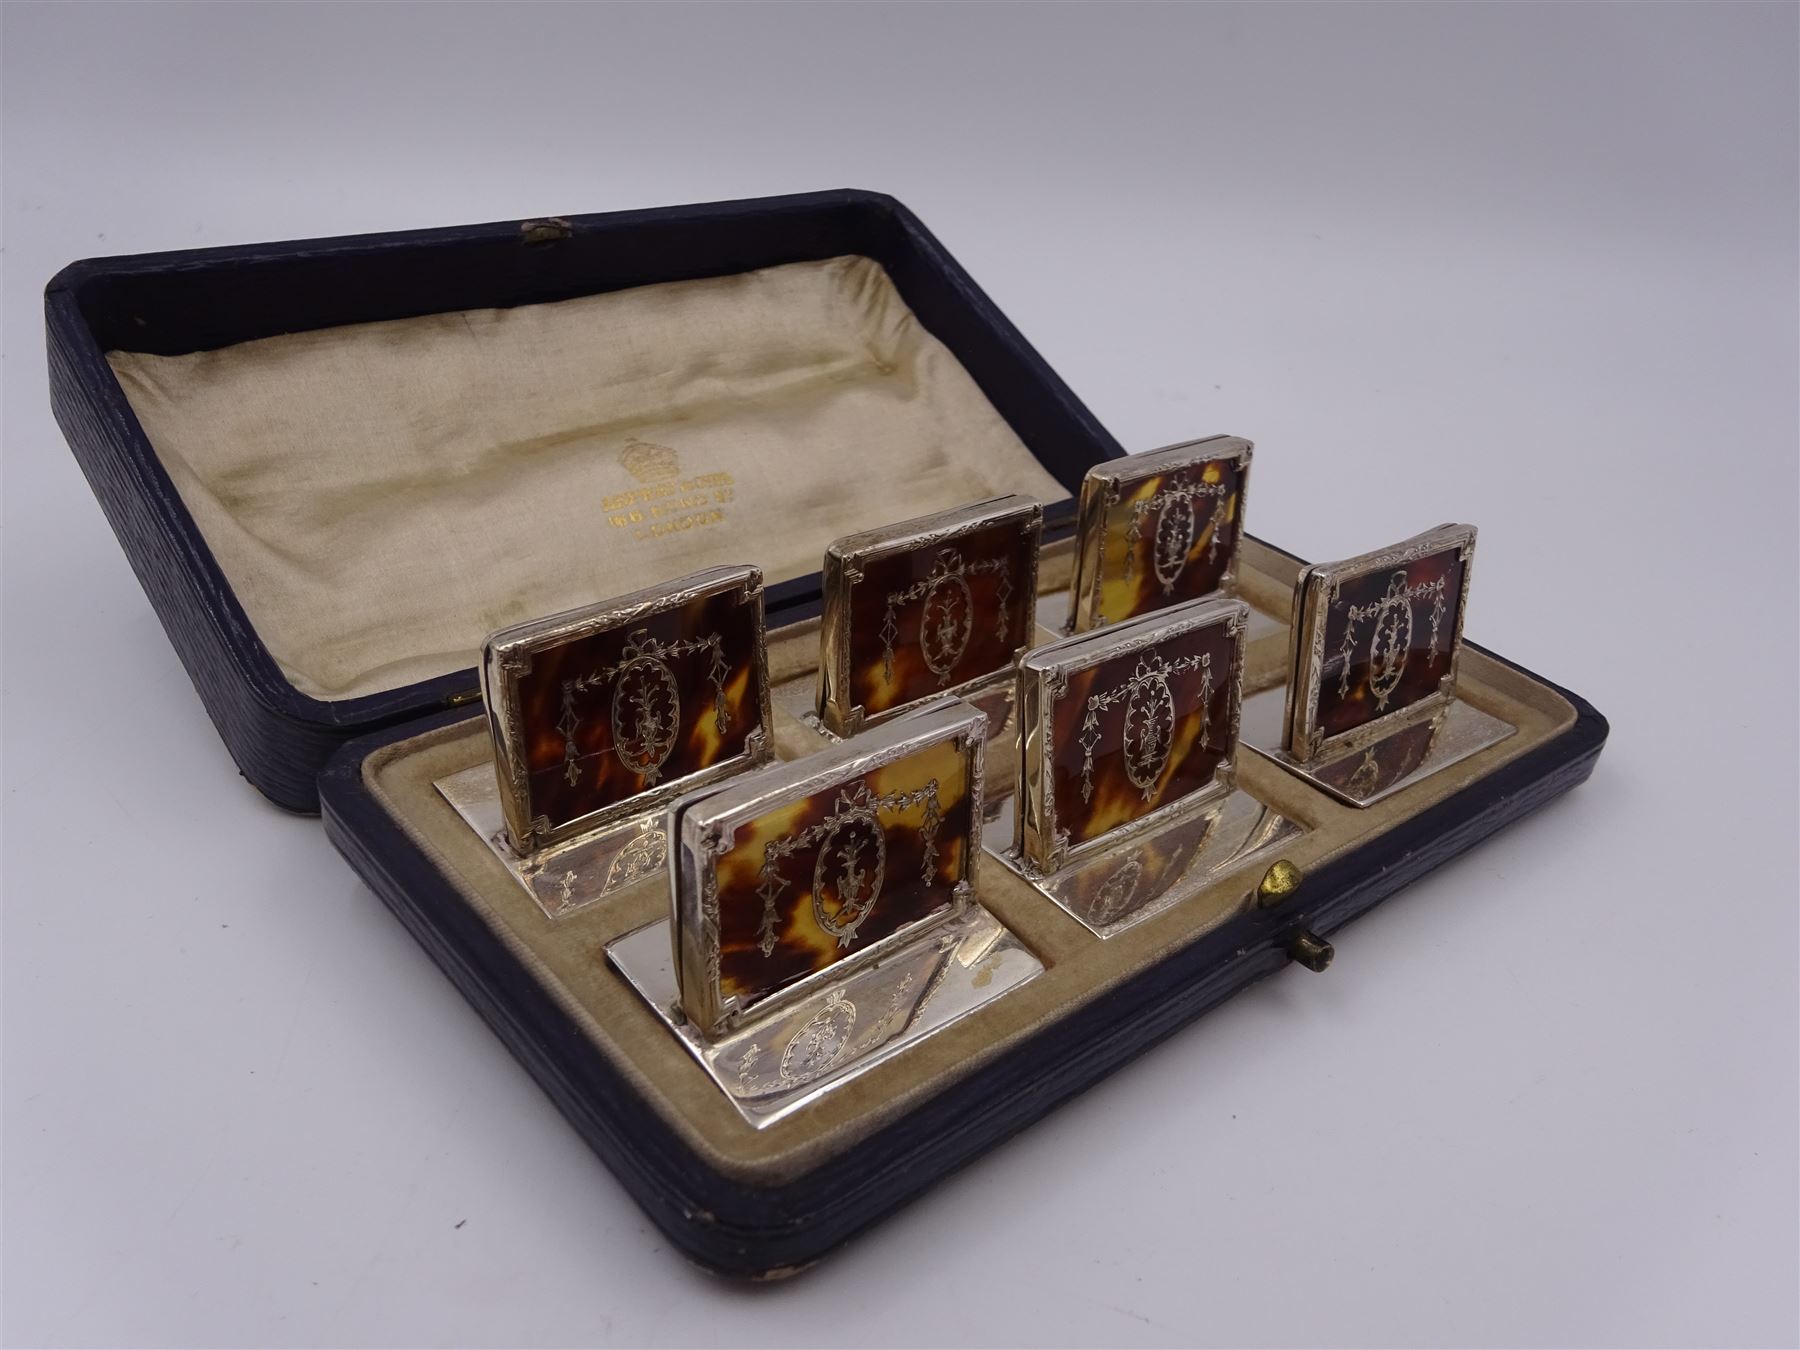 Set of six early 20th century silver mounted tortoiseshell place card holders by Asprey - Image 22 of 28